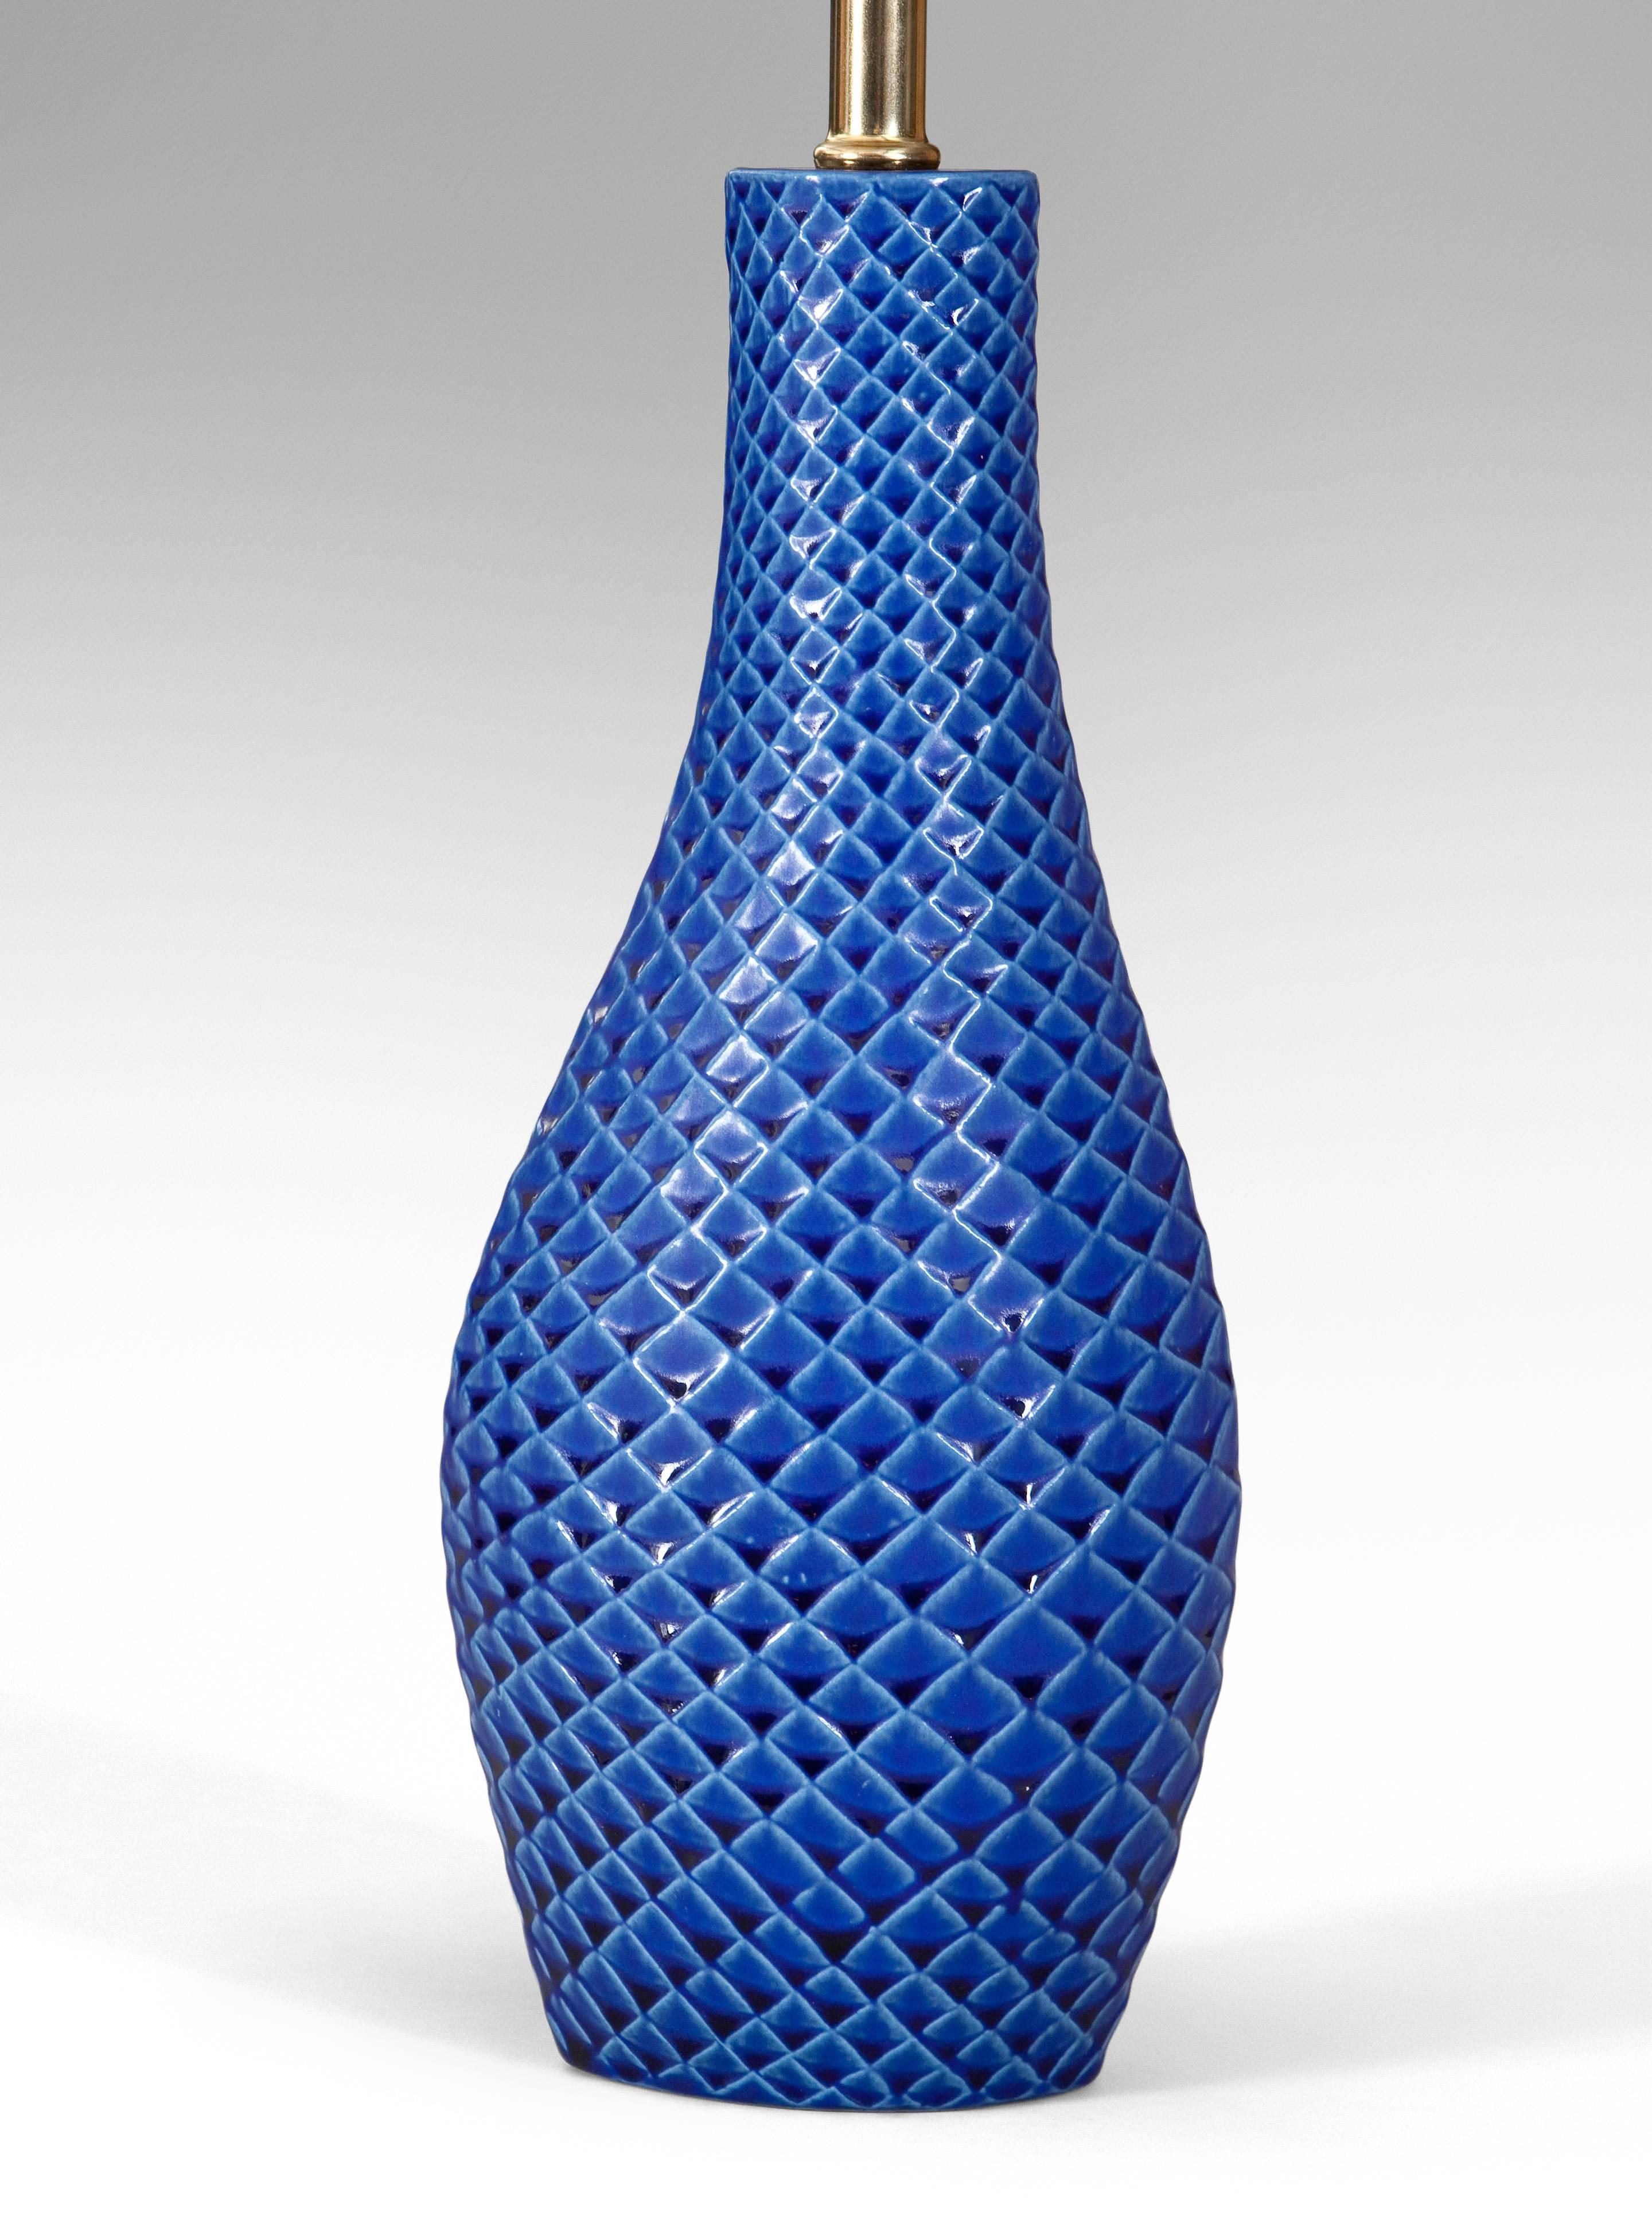 Each lamp with an elliptical mouth above a conforming neck and slightly asymmetrical swollen base, adorned in parallel scoring creating a scale-like pattern. A wonderful intense blue glaze.